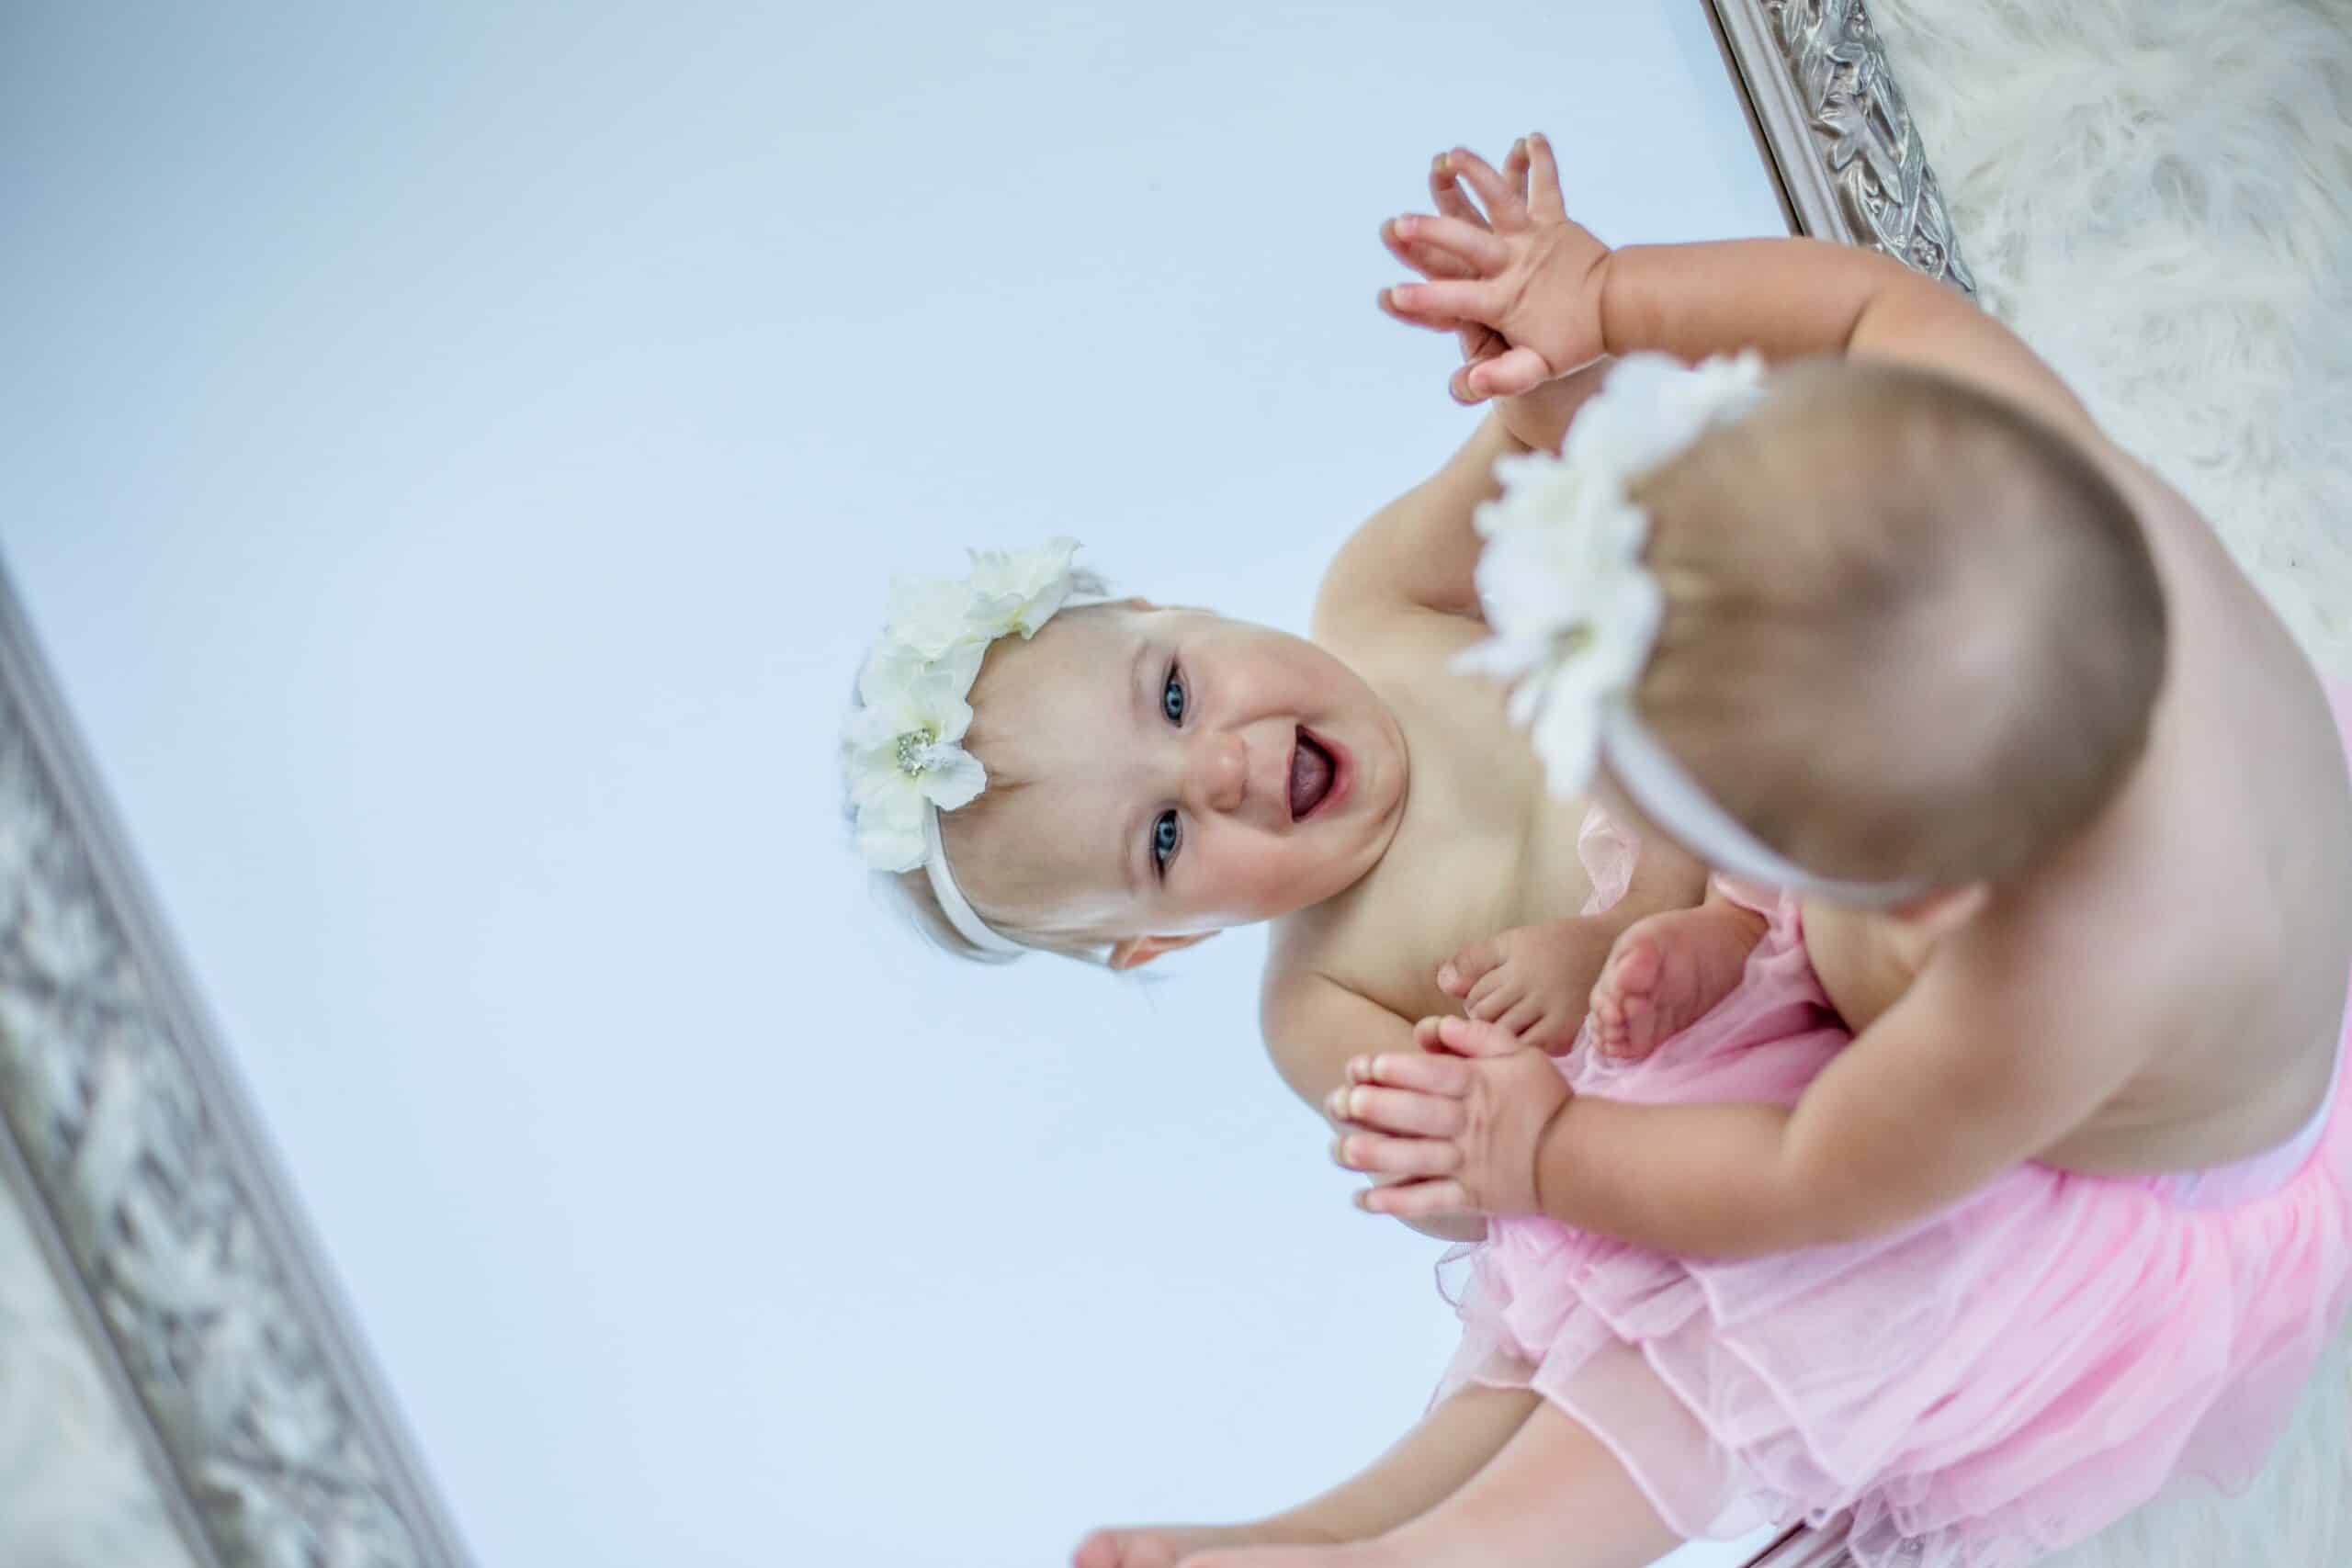 Baby Images & Photos Baby Love Smile Bow Laugh Hd Pink Wallpapers Reflection Toddler Selfie Mirror